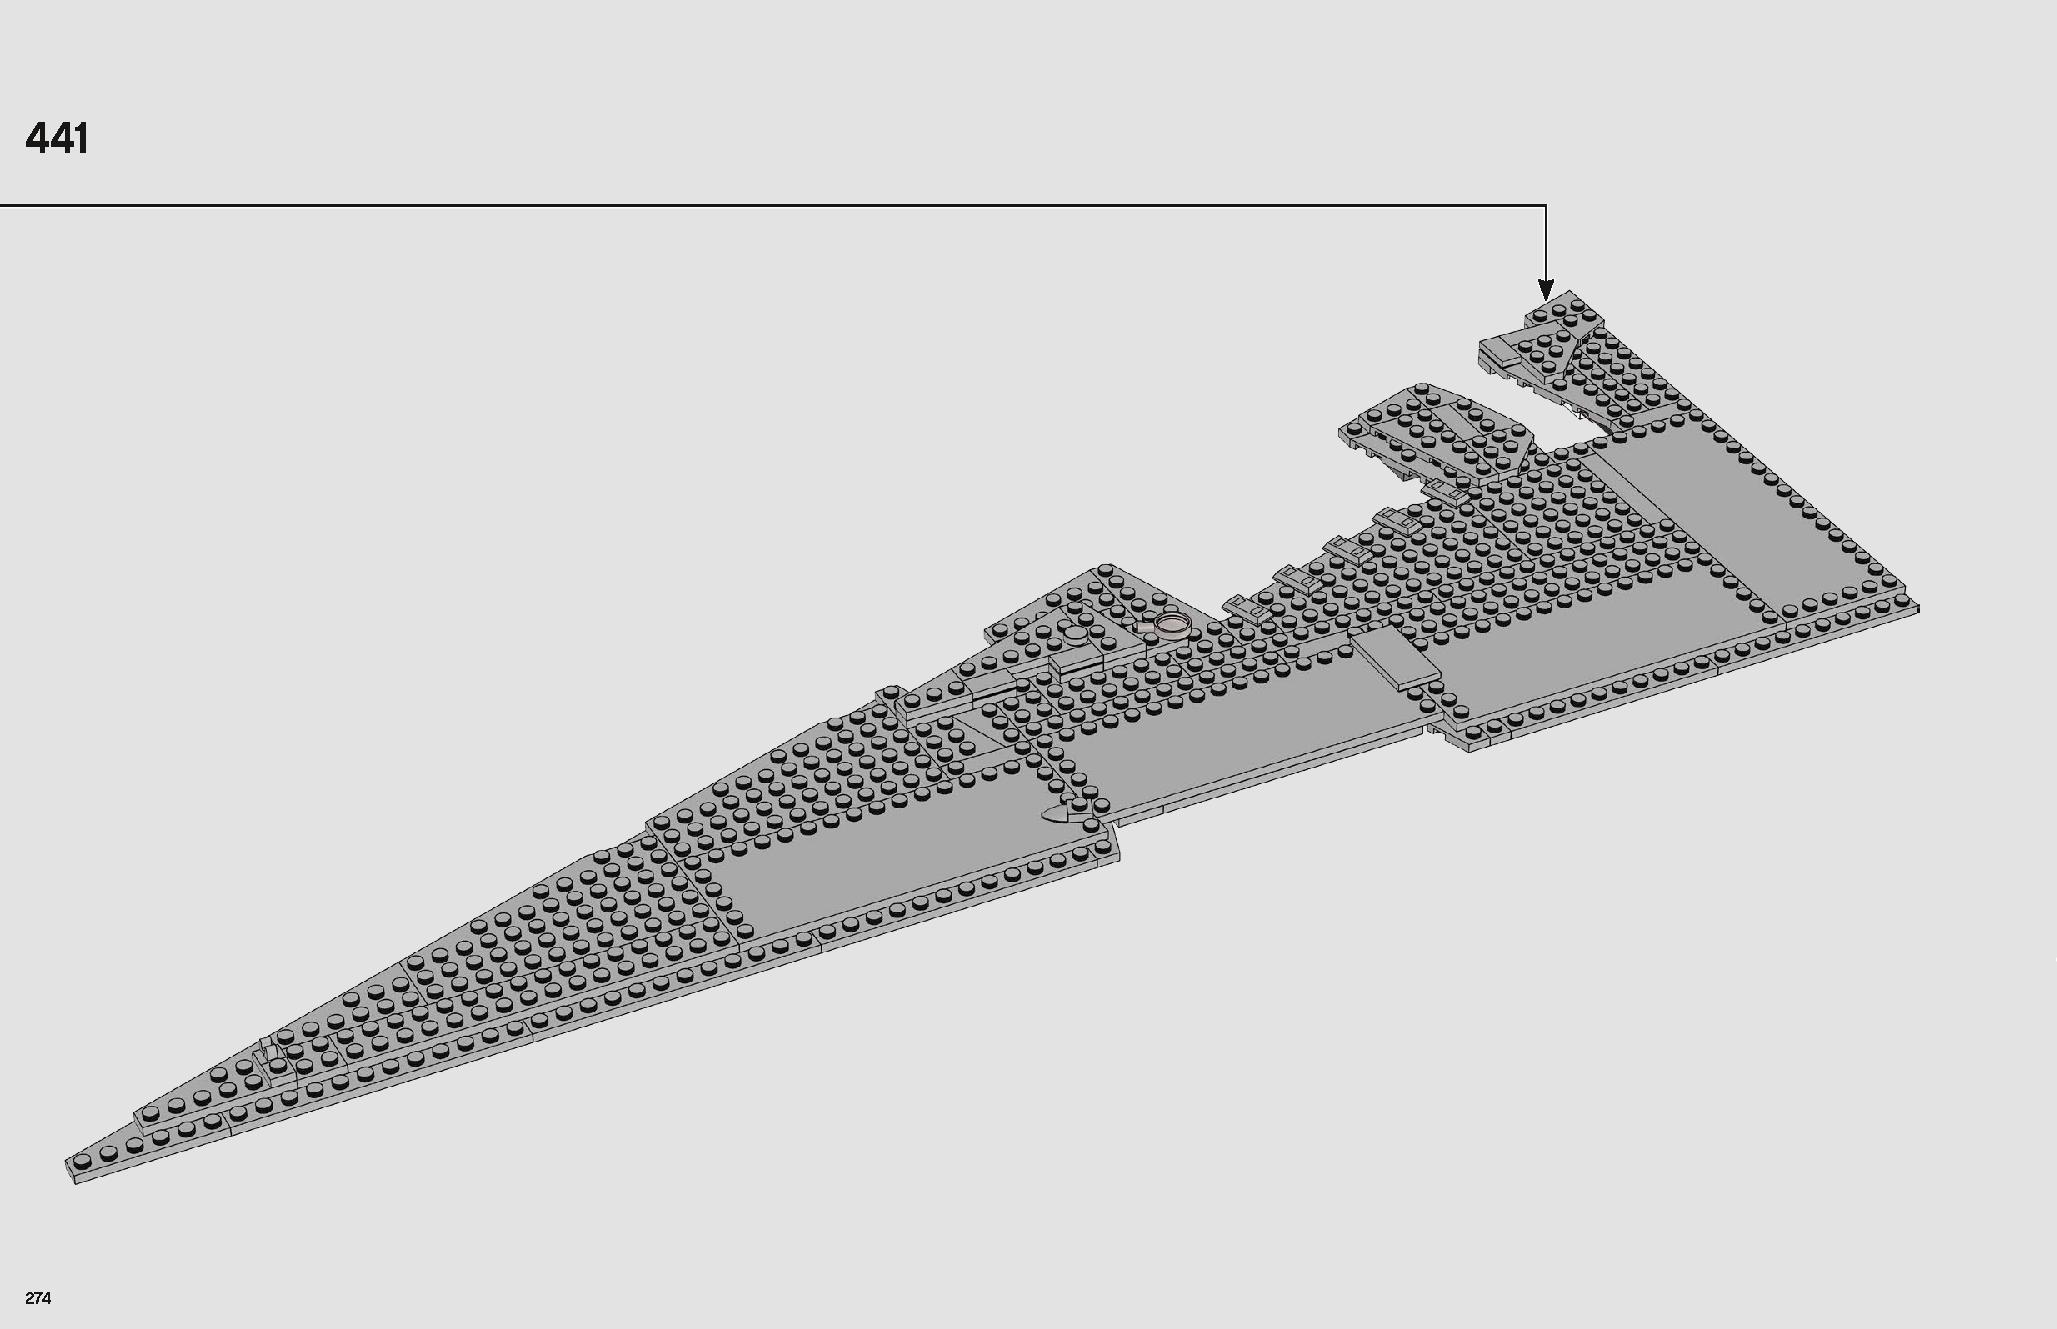 Imperial Star Destroyer 75252 レゴの商品情報 レゴの説明書・組立方法 274 page